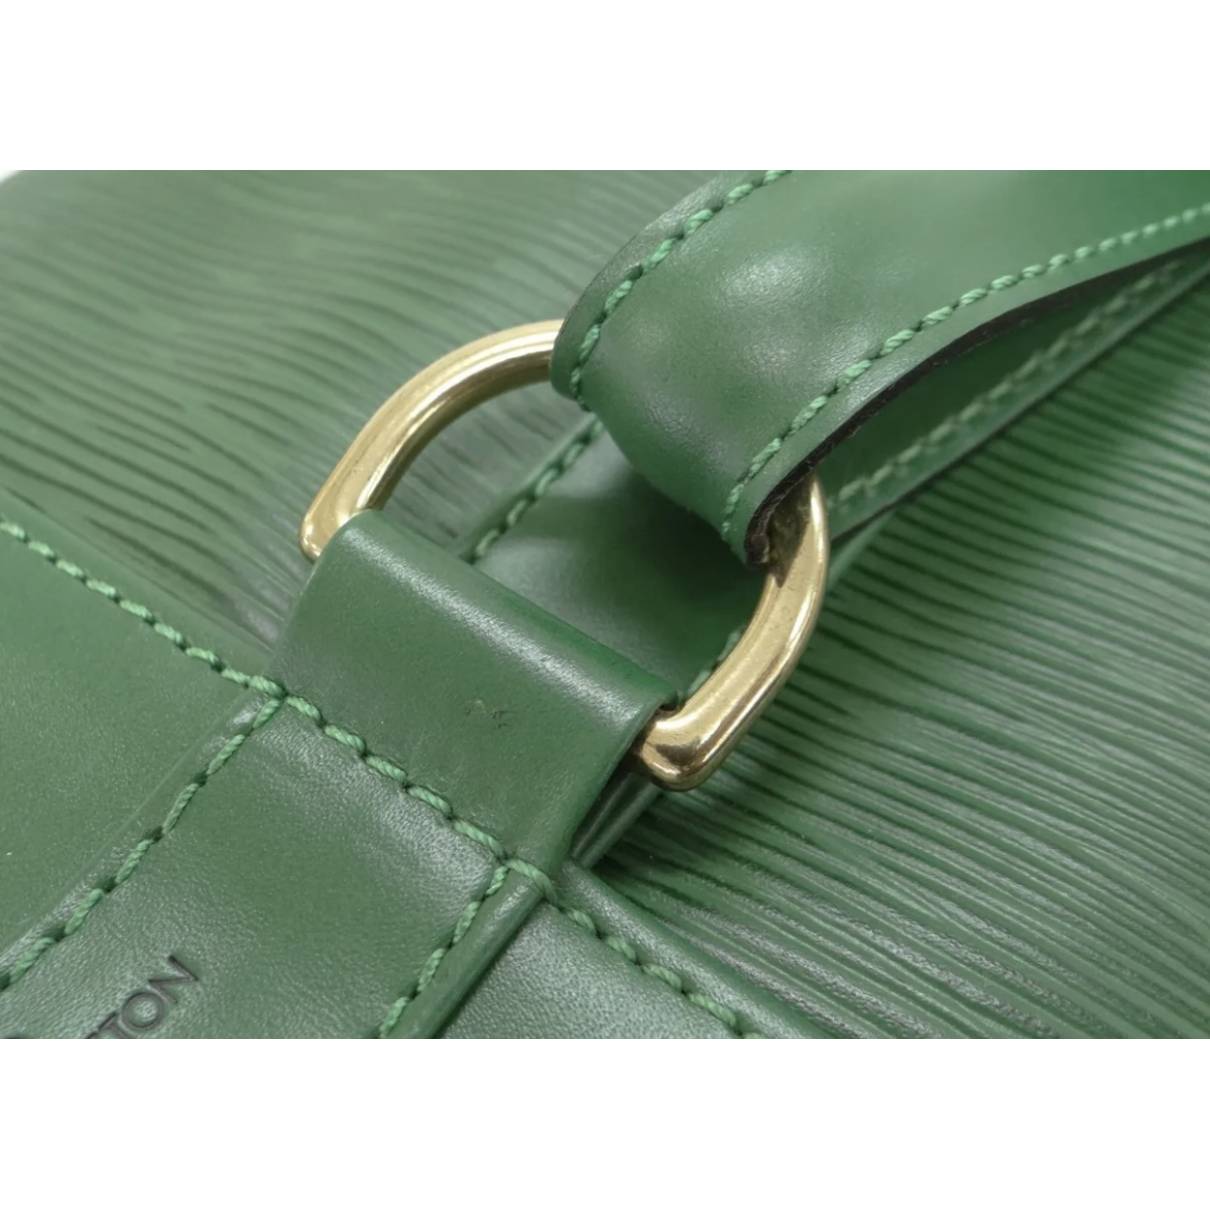 Randonnée leather backpack Louis Vuitton Green in Leather - 34628803